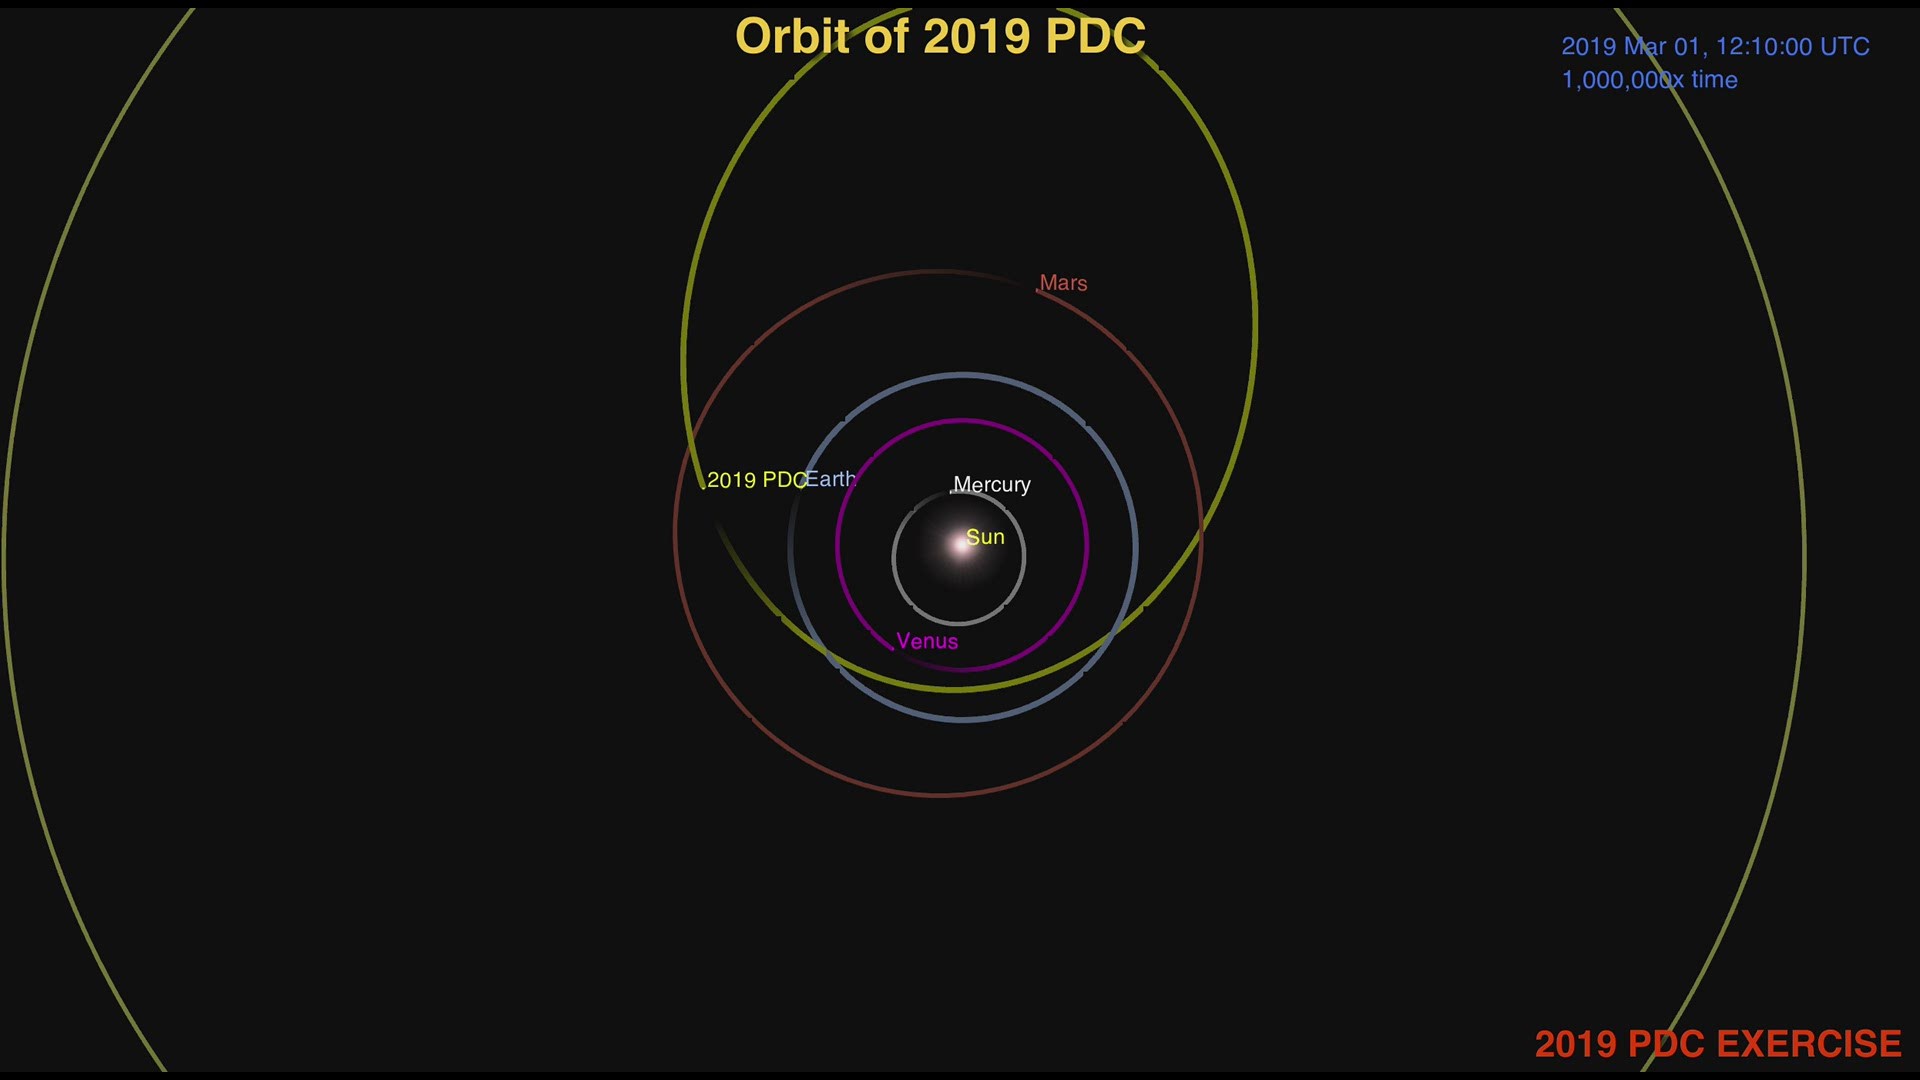 EXERCISE ONLY. NOT A REAL ASTEROID. This is a simulation of a hypothetical asteroid, named 2019 PDC, that will pass close to earth in 2027.